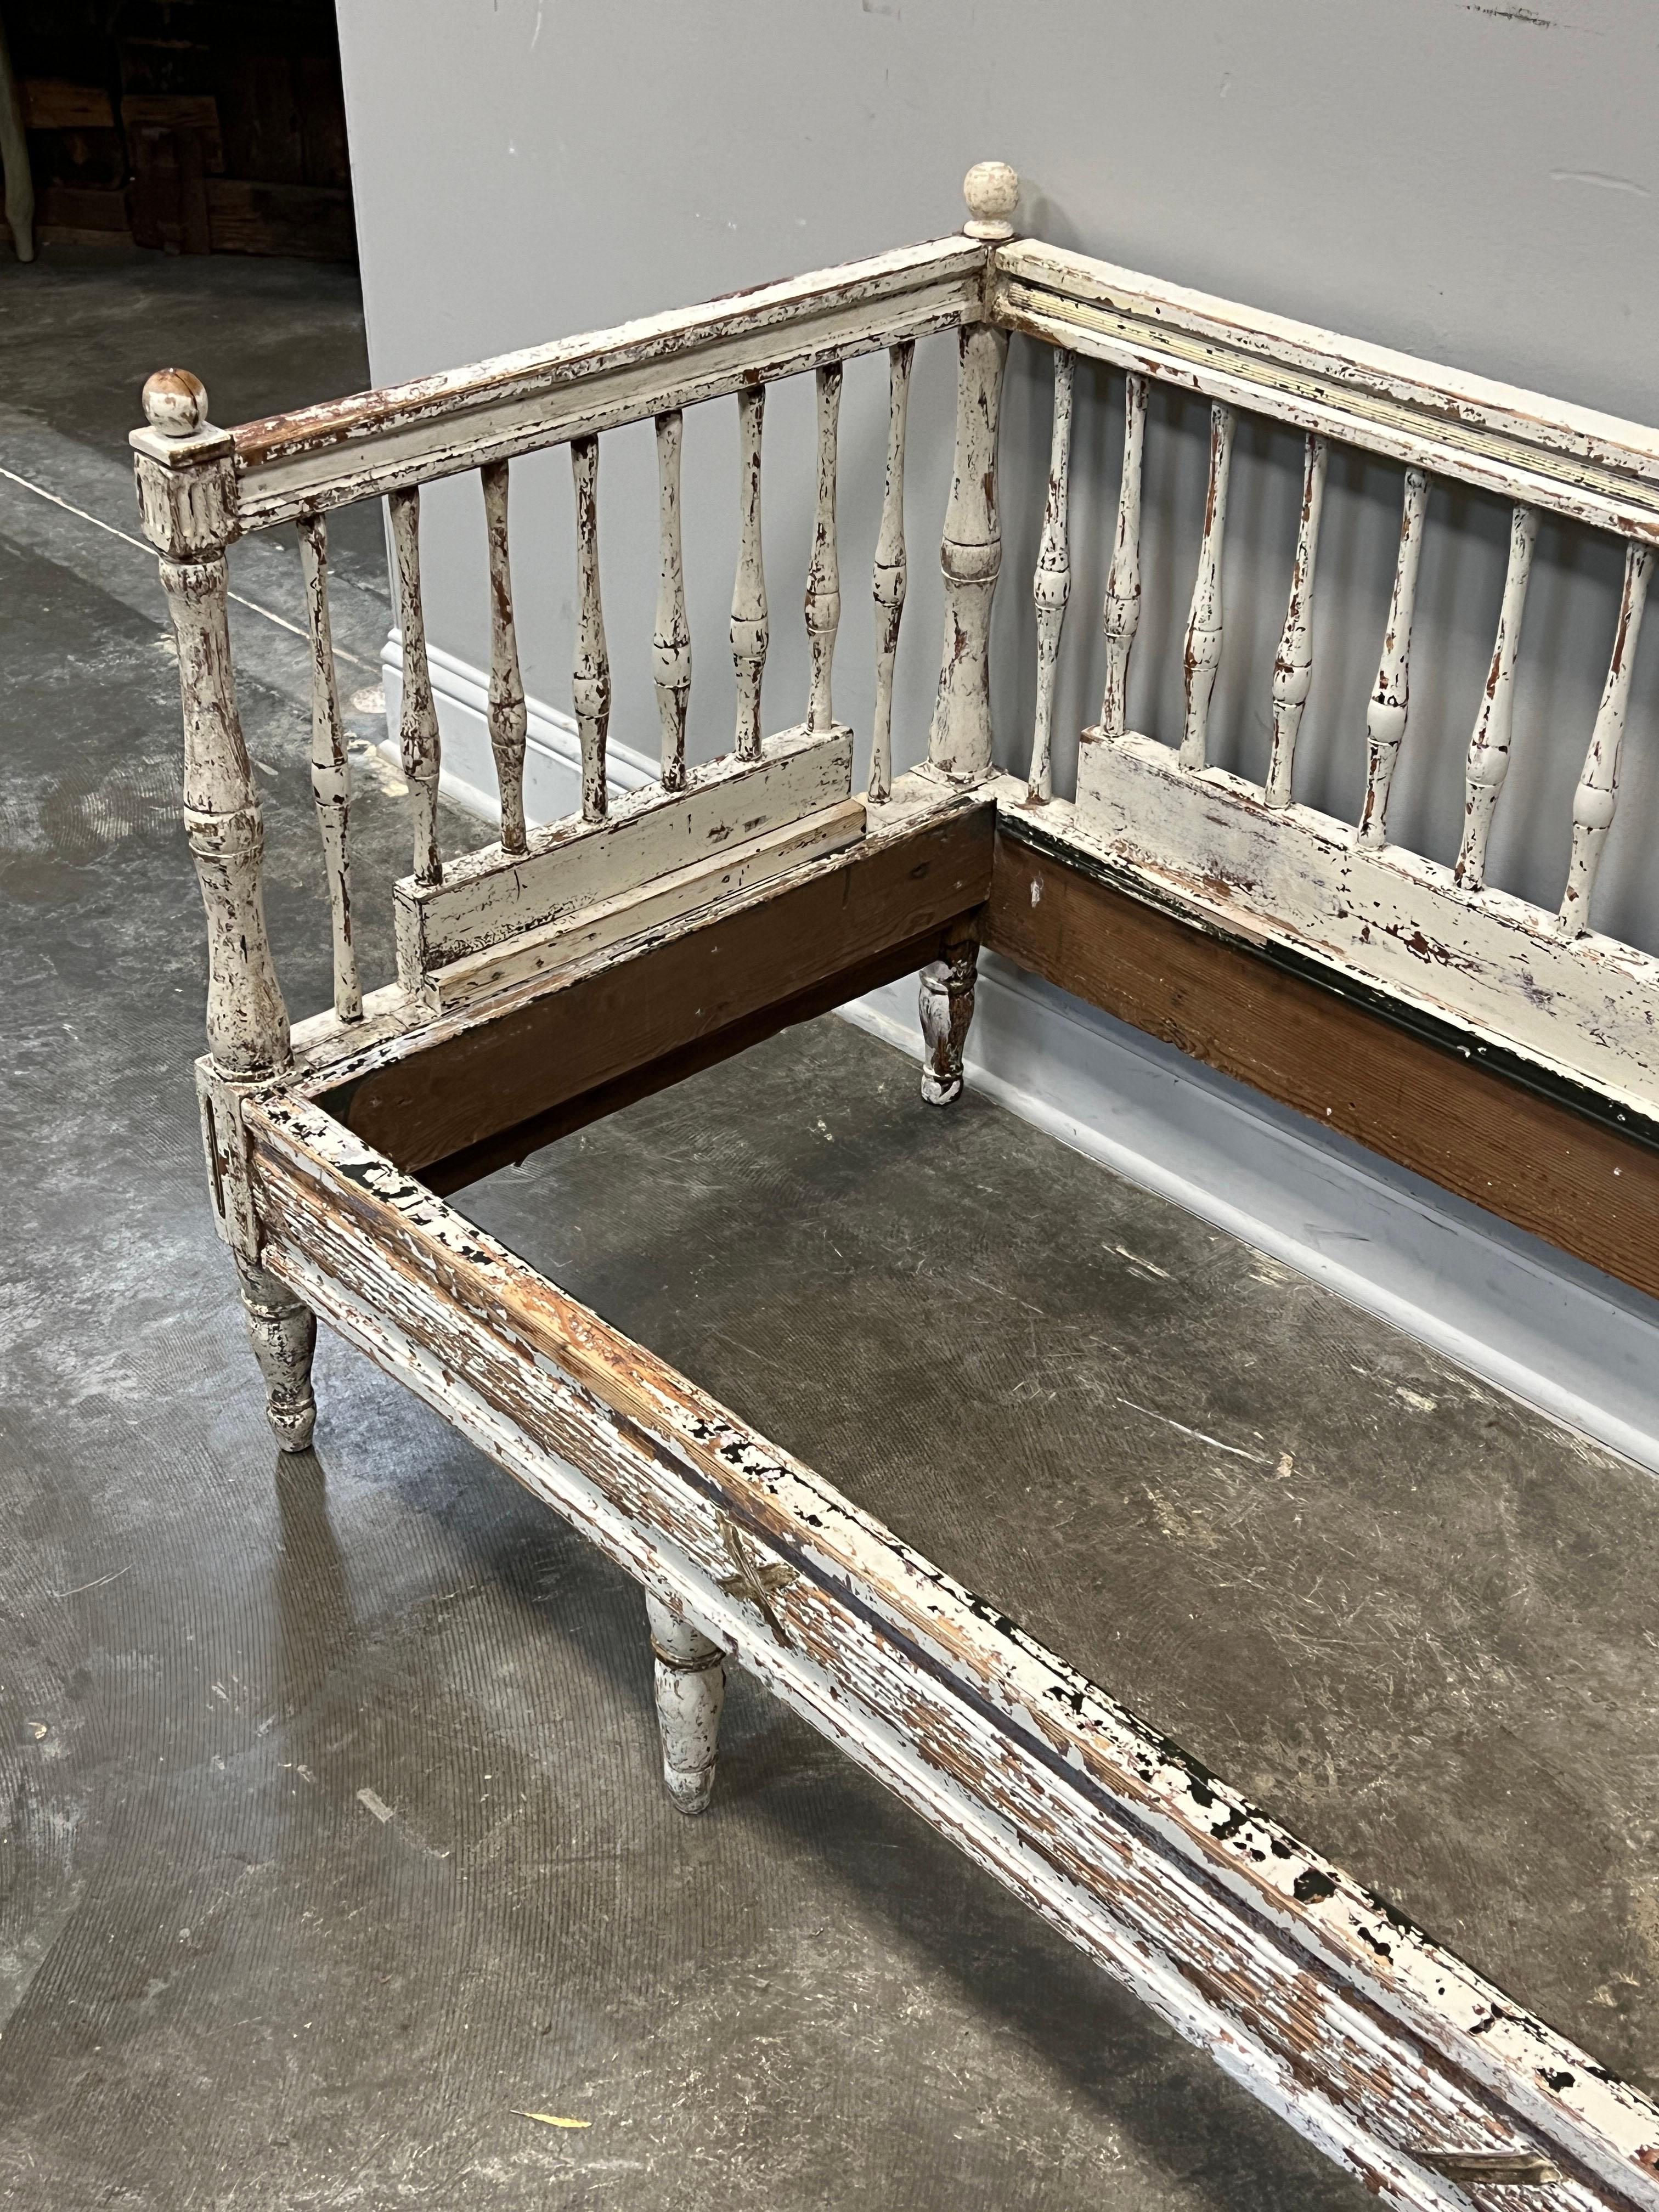 Early Swedish settee in the Gustavian style which echoes the Louis XVI style in France. The influence of the French style is further evidence with subtle banded and ribboned decorations on the end and cross traverses and turned Louis XVI style legs.